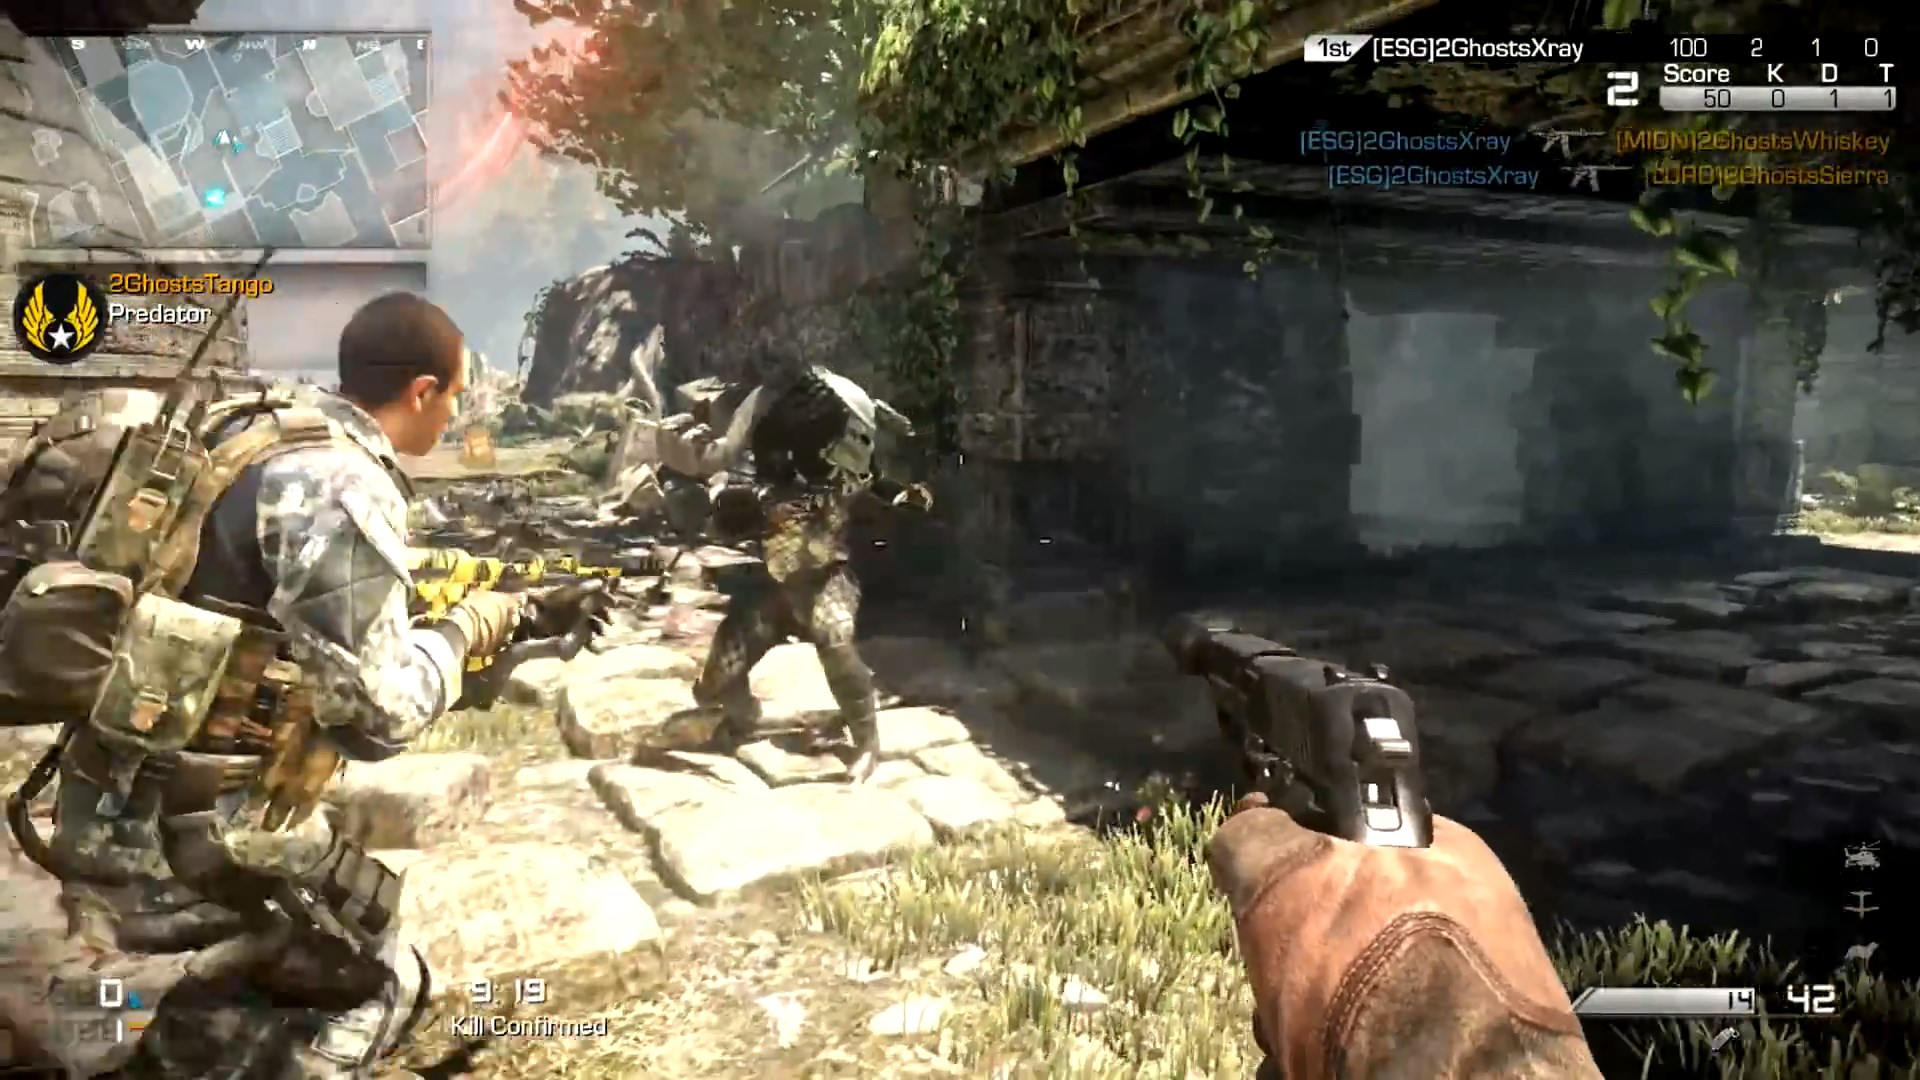 Call of Duty: Ghosts - Xbox 360 Gameplay 